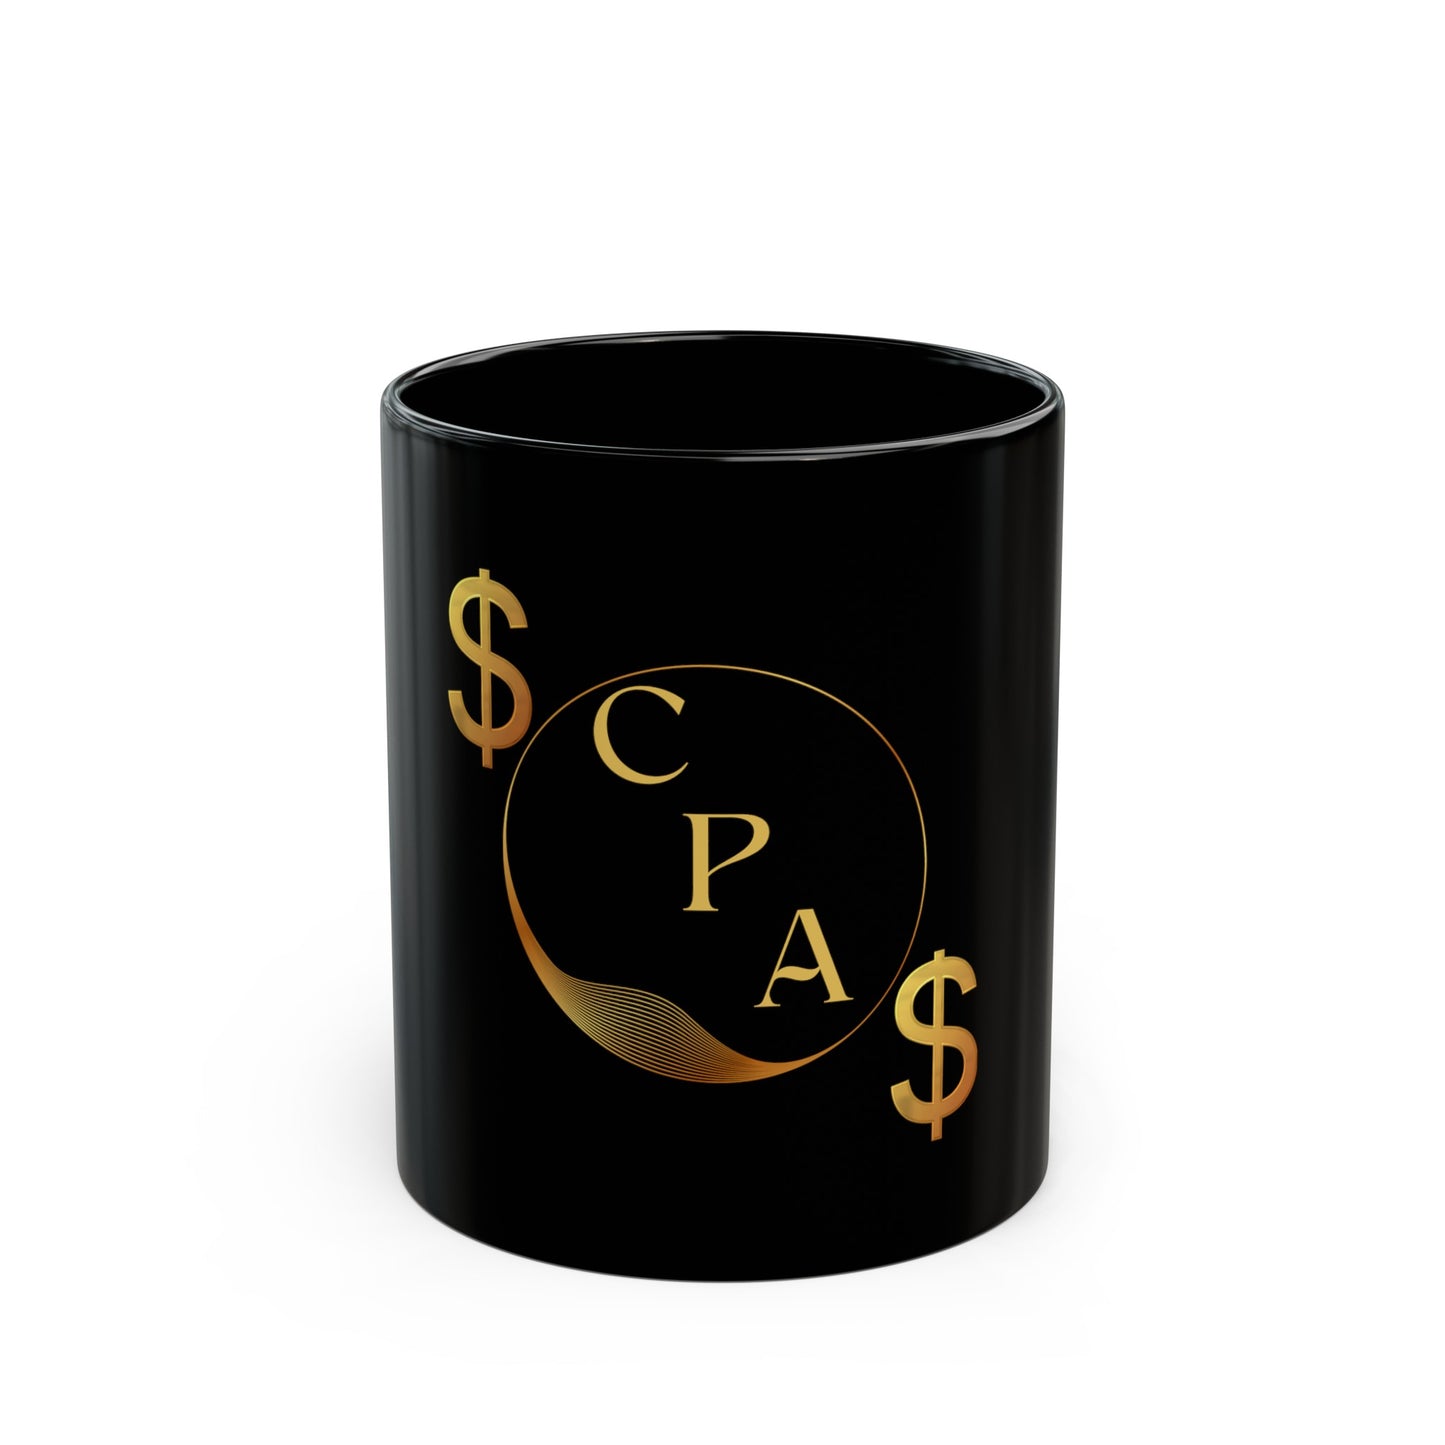 C.P.A- Coffee Mug with Credentials for Financial Advisors